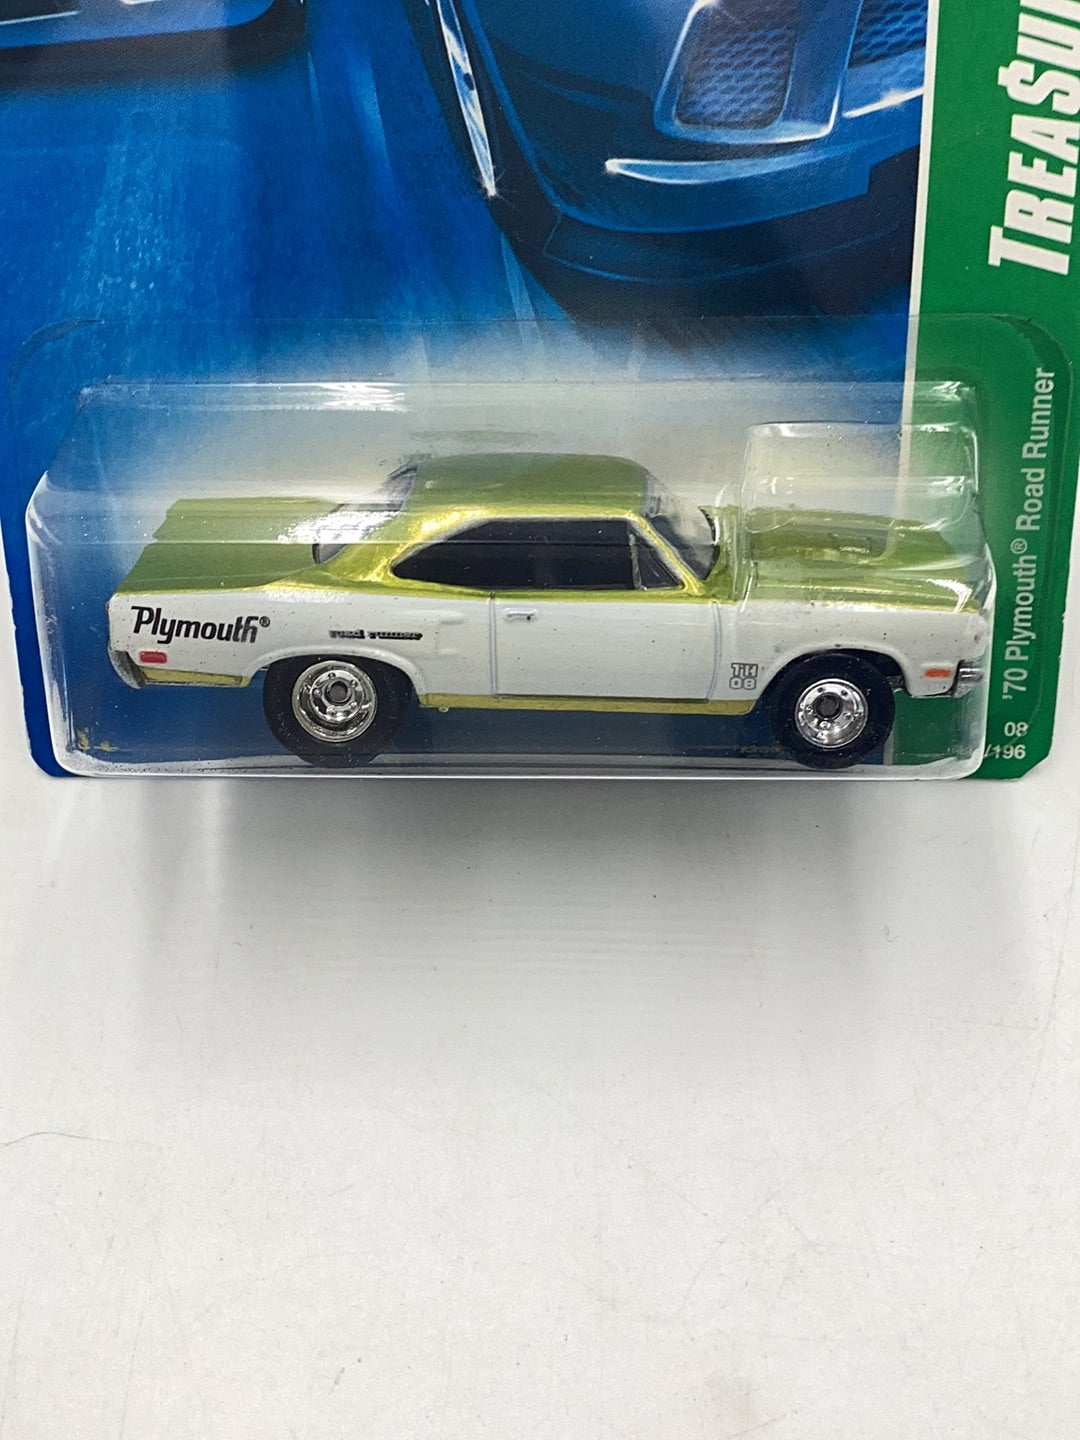 2008 Hot Wheels Super Treasure Hunt 70 Plymouth Roadrunner #162 with protector